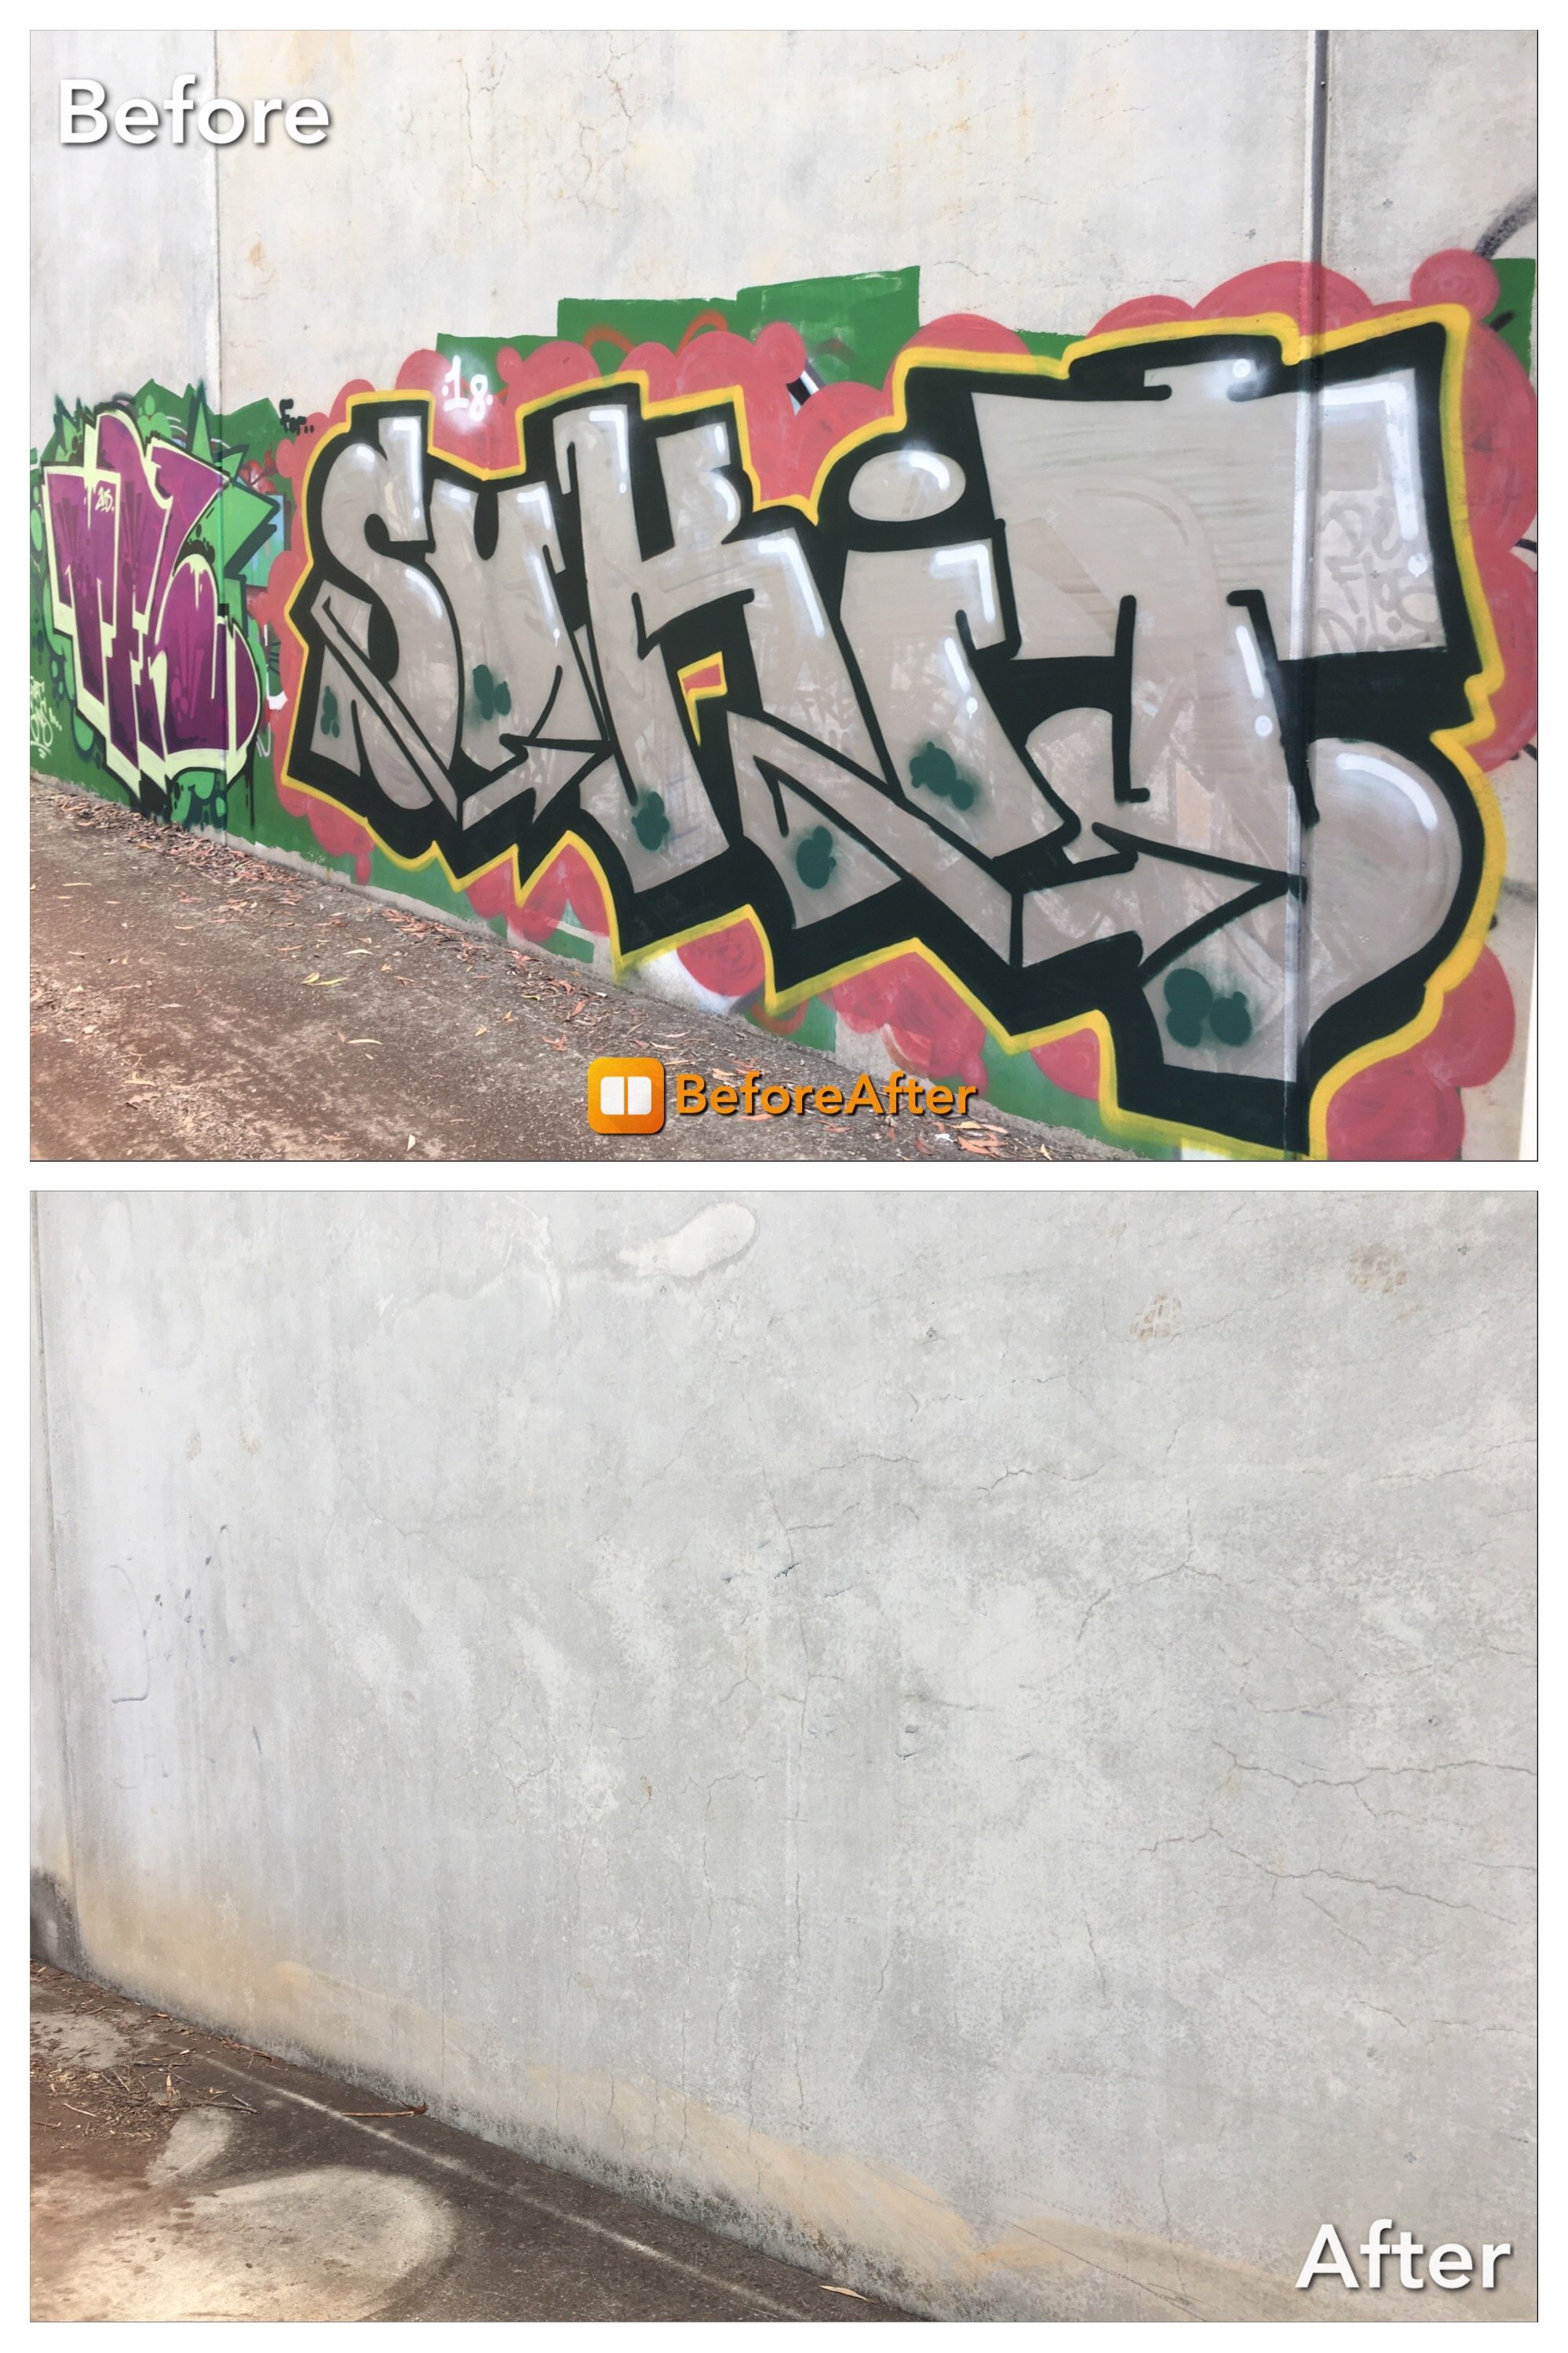 Before and after graffiti cleaning on a wall